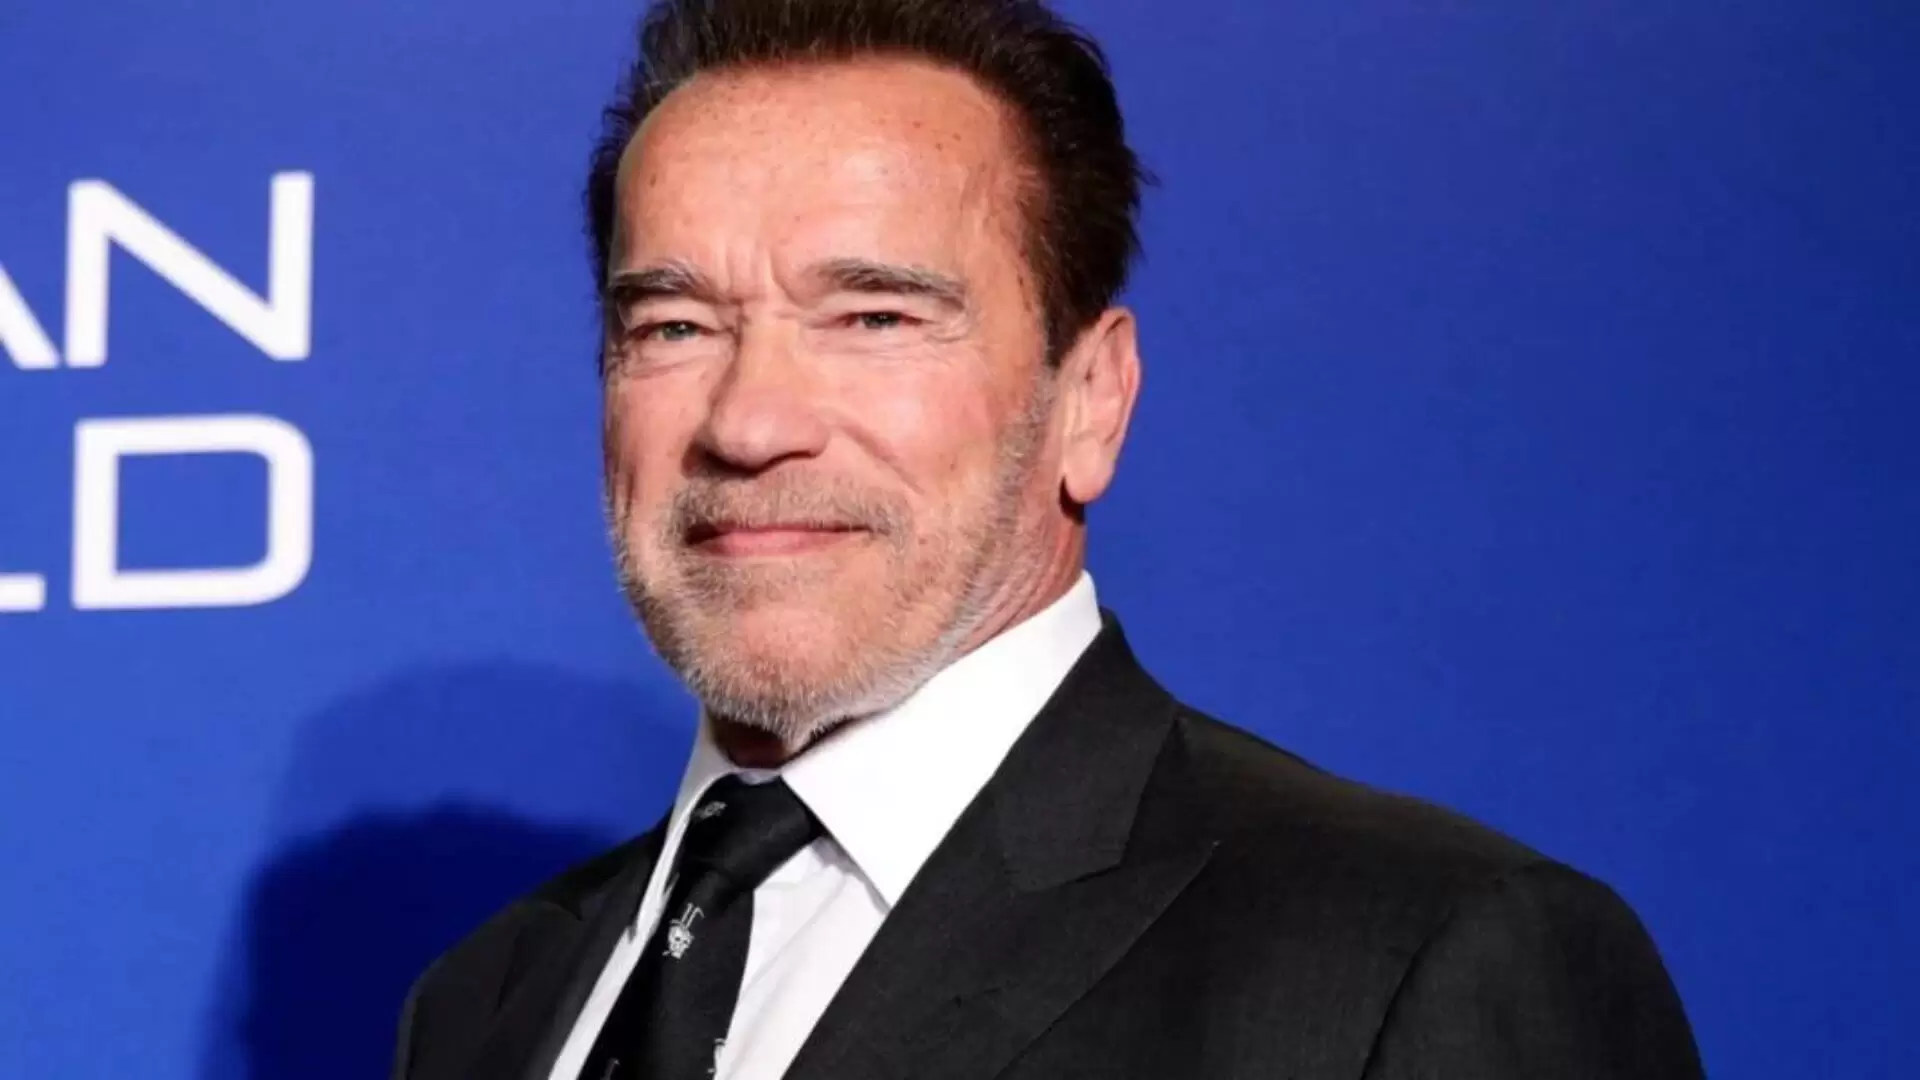 Notes Arnold Schwarzenegger’s Three Rules For Success (1)